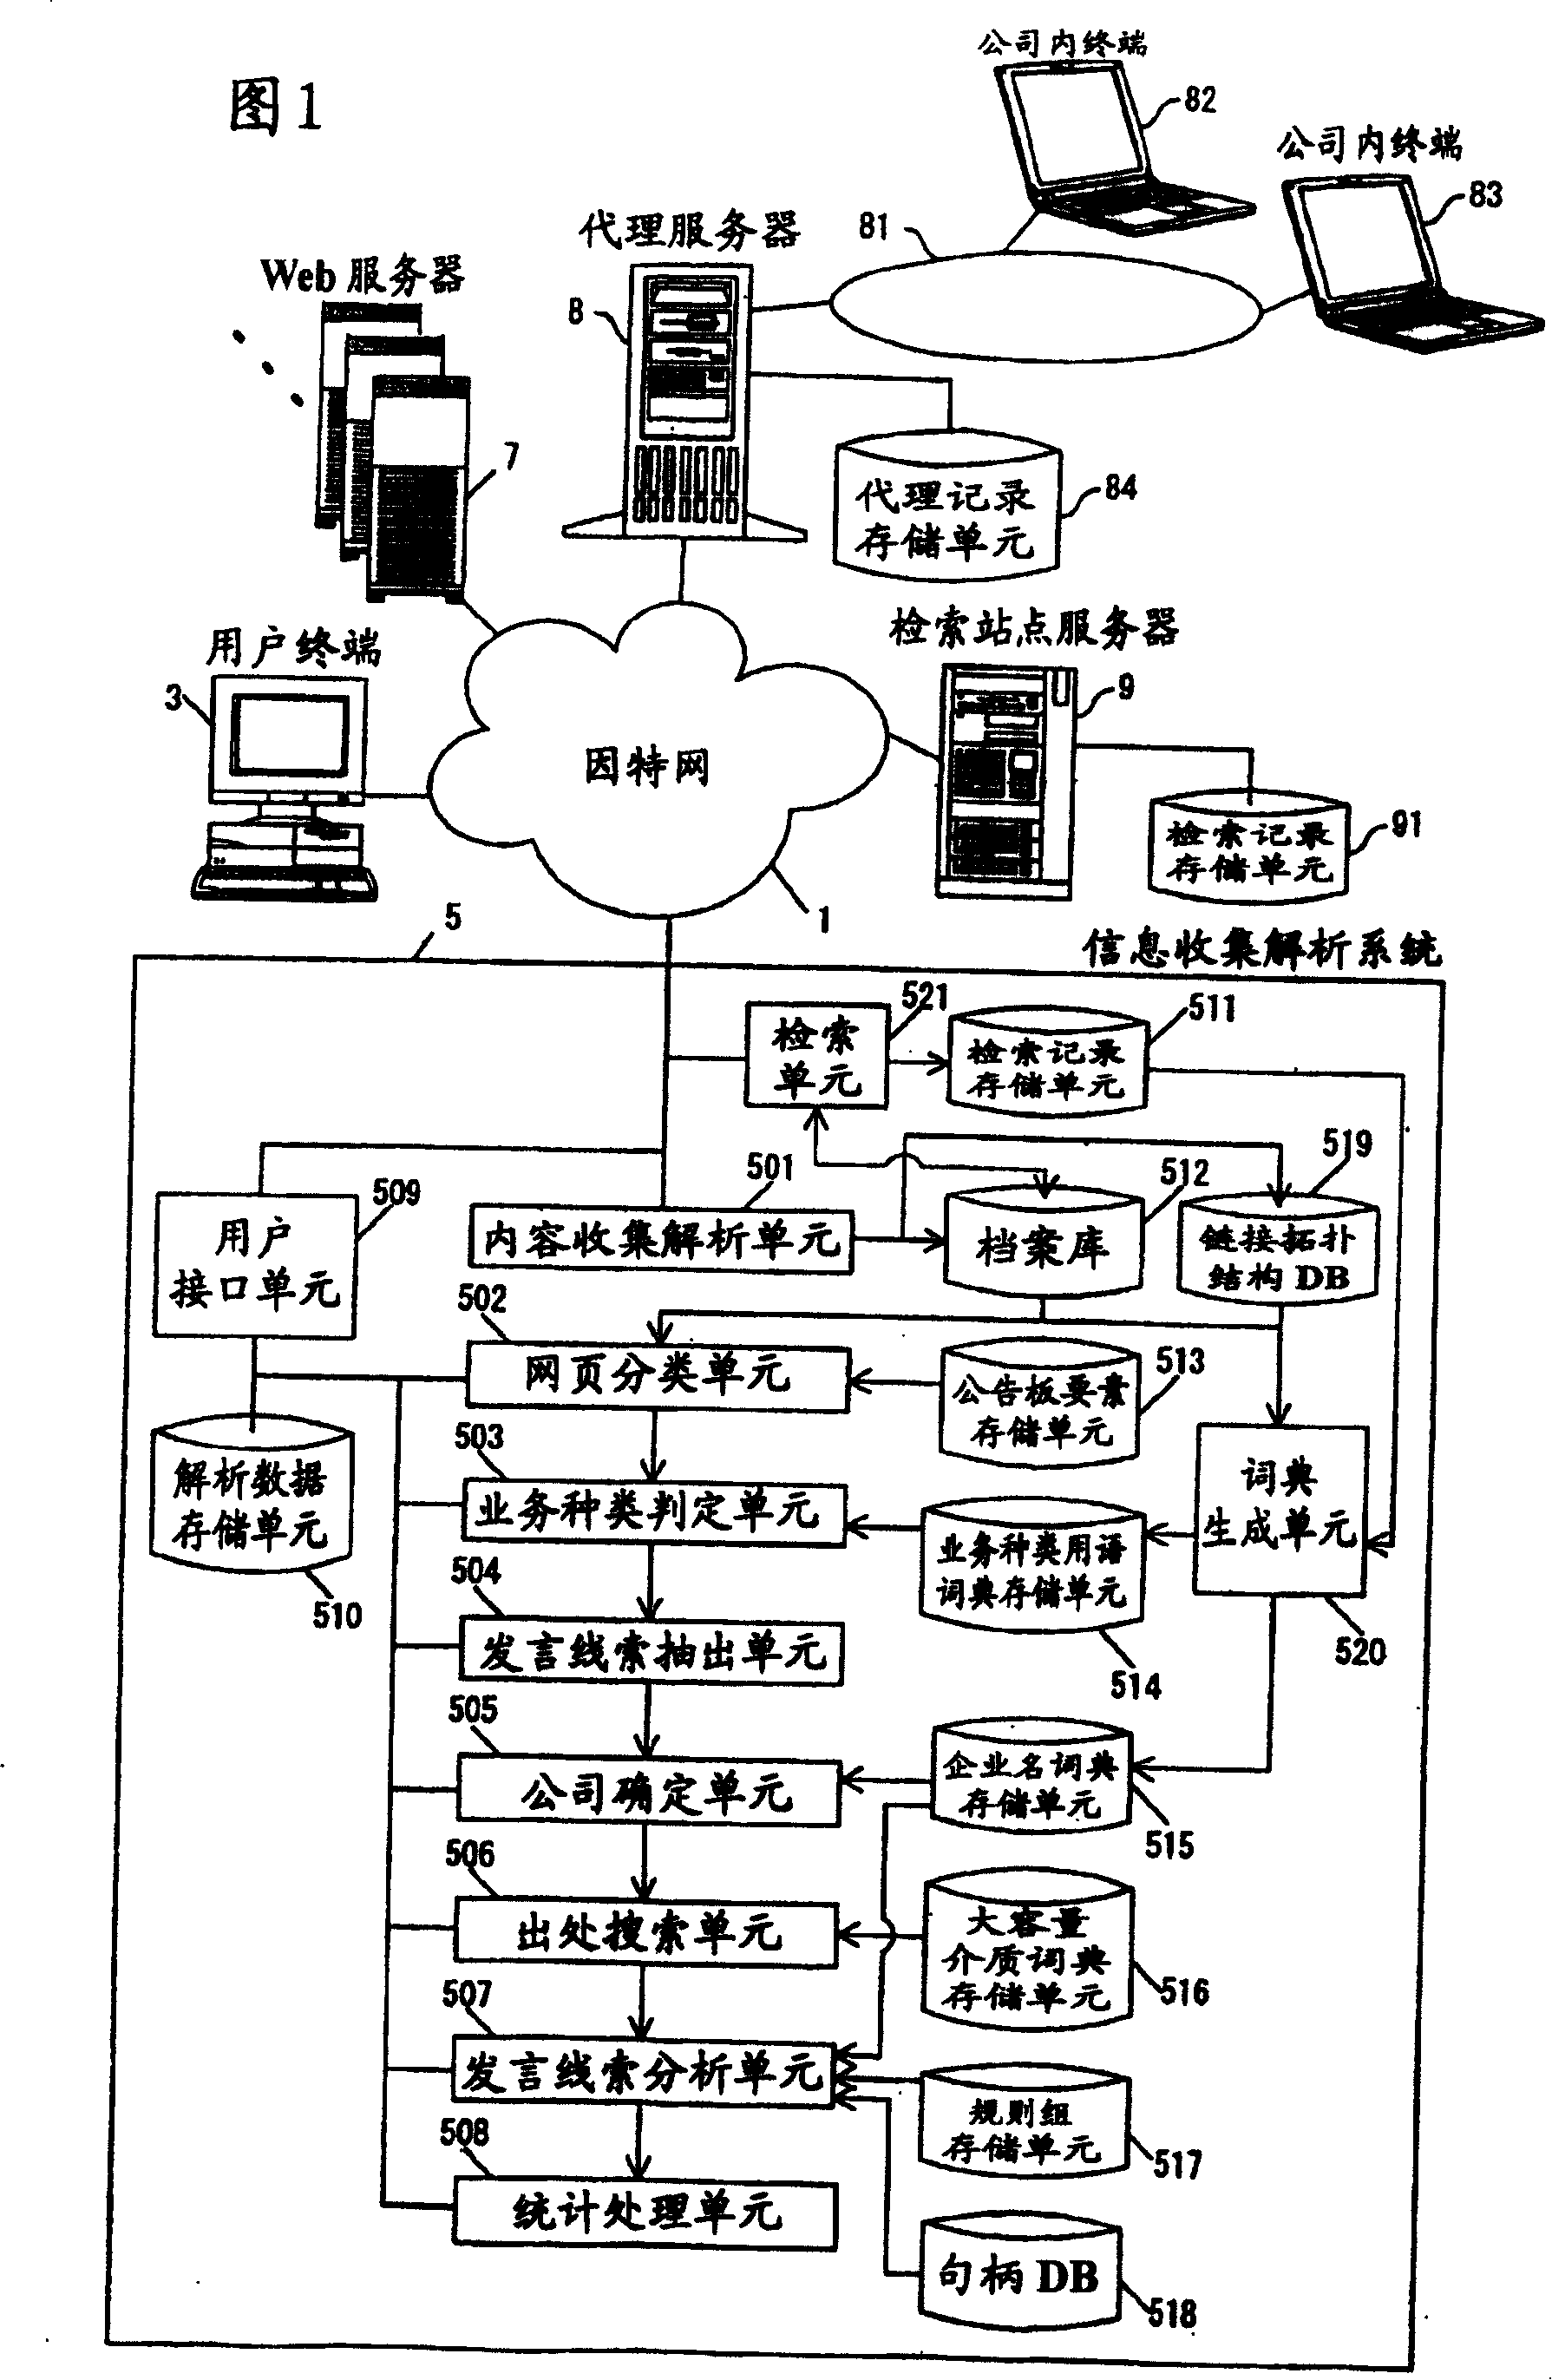 Content information analyzing method and apparatus